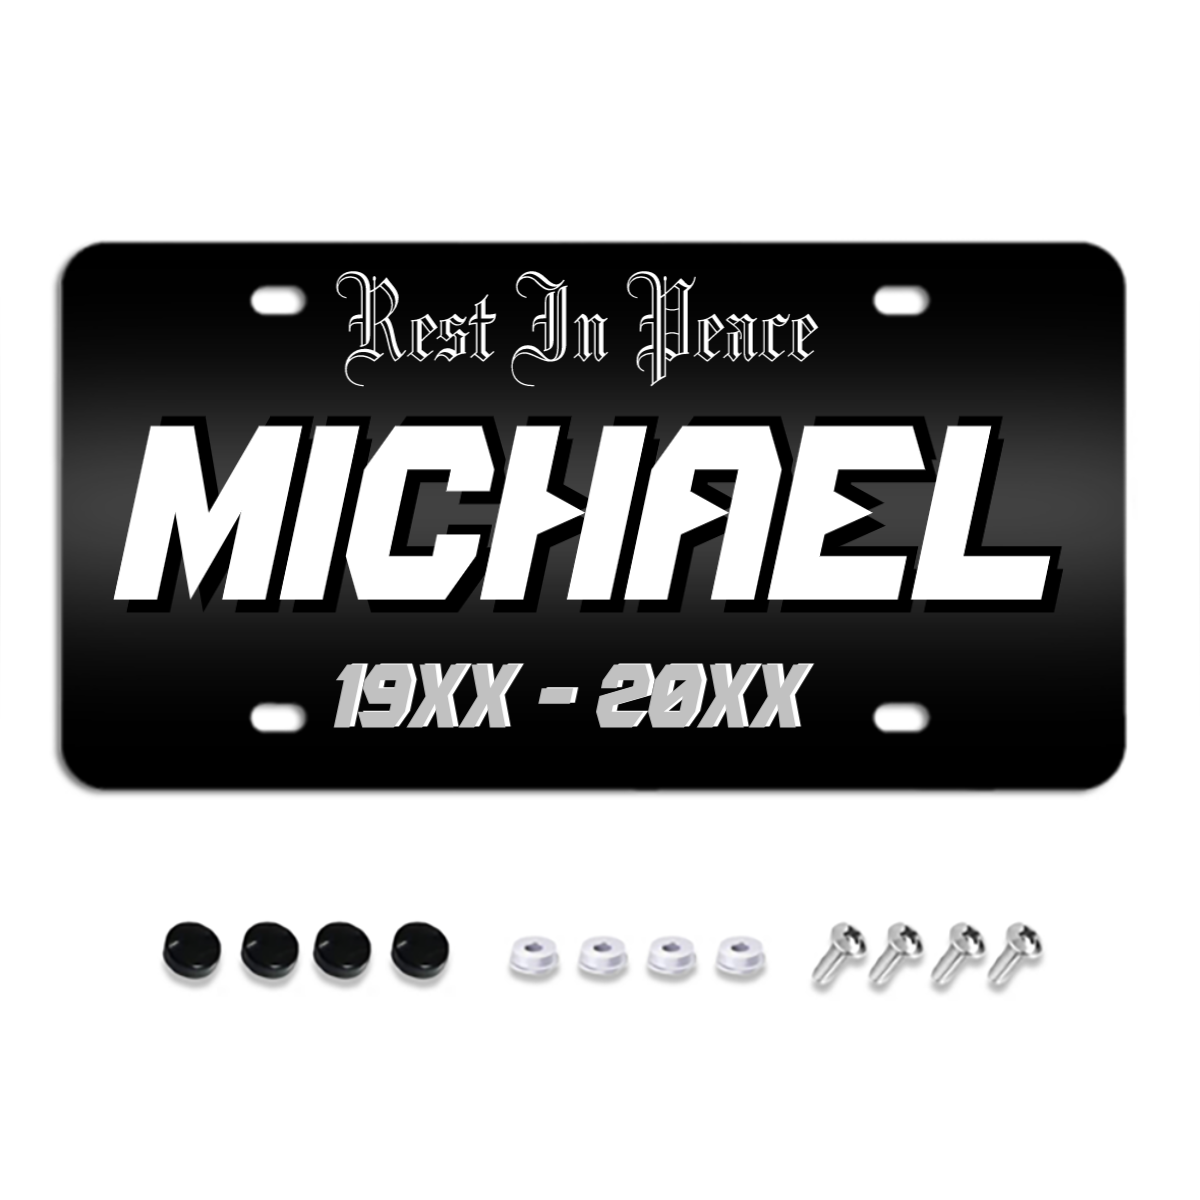 Memorial | Black and Silver License Plate